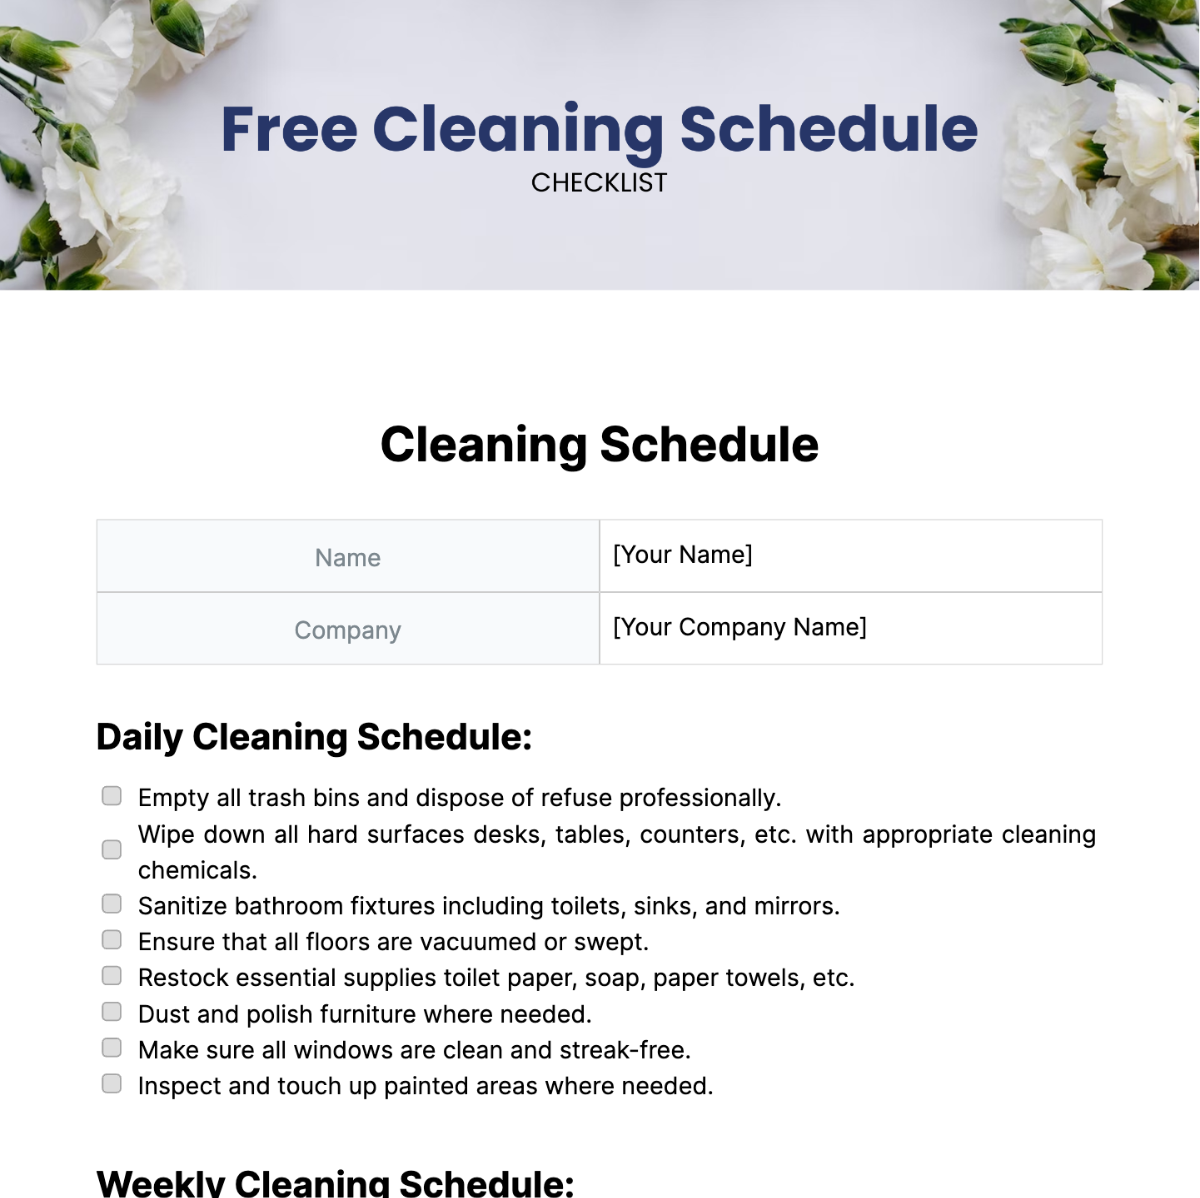 Free Cleaning Schedule Checklist Template